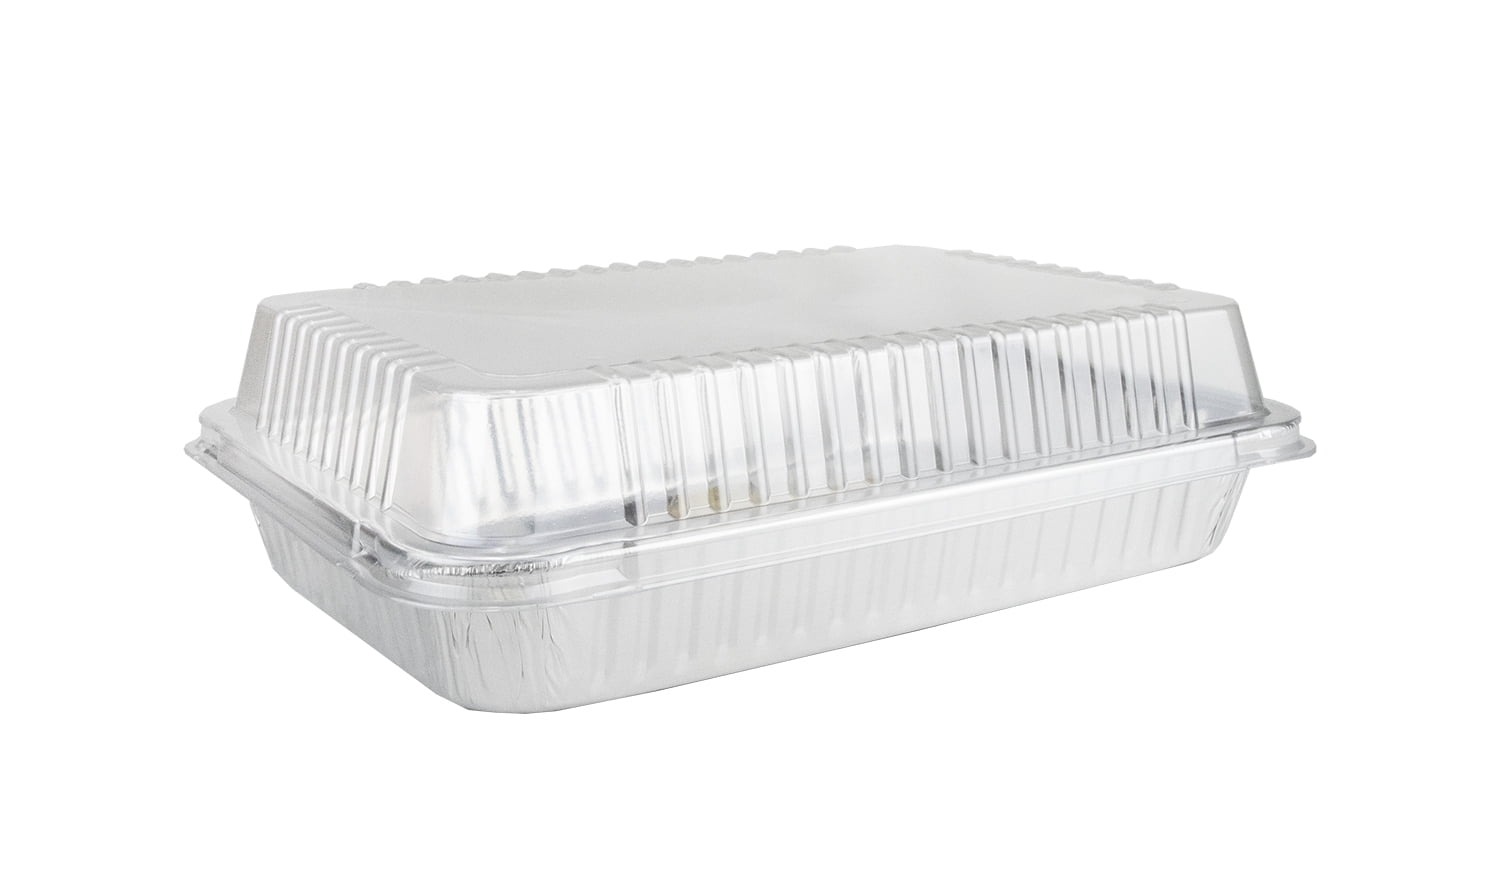 New Aluminium Disposable Containers 12" x 8" Grill Large foil baking tray